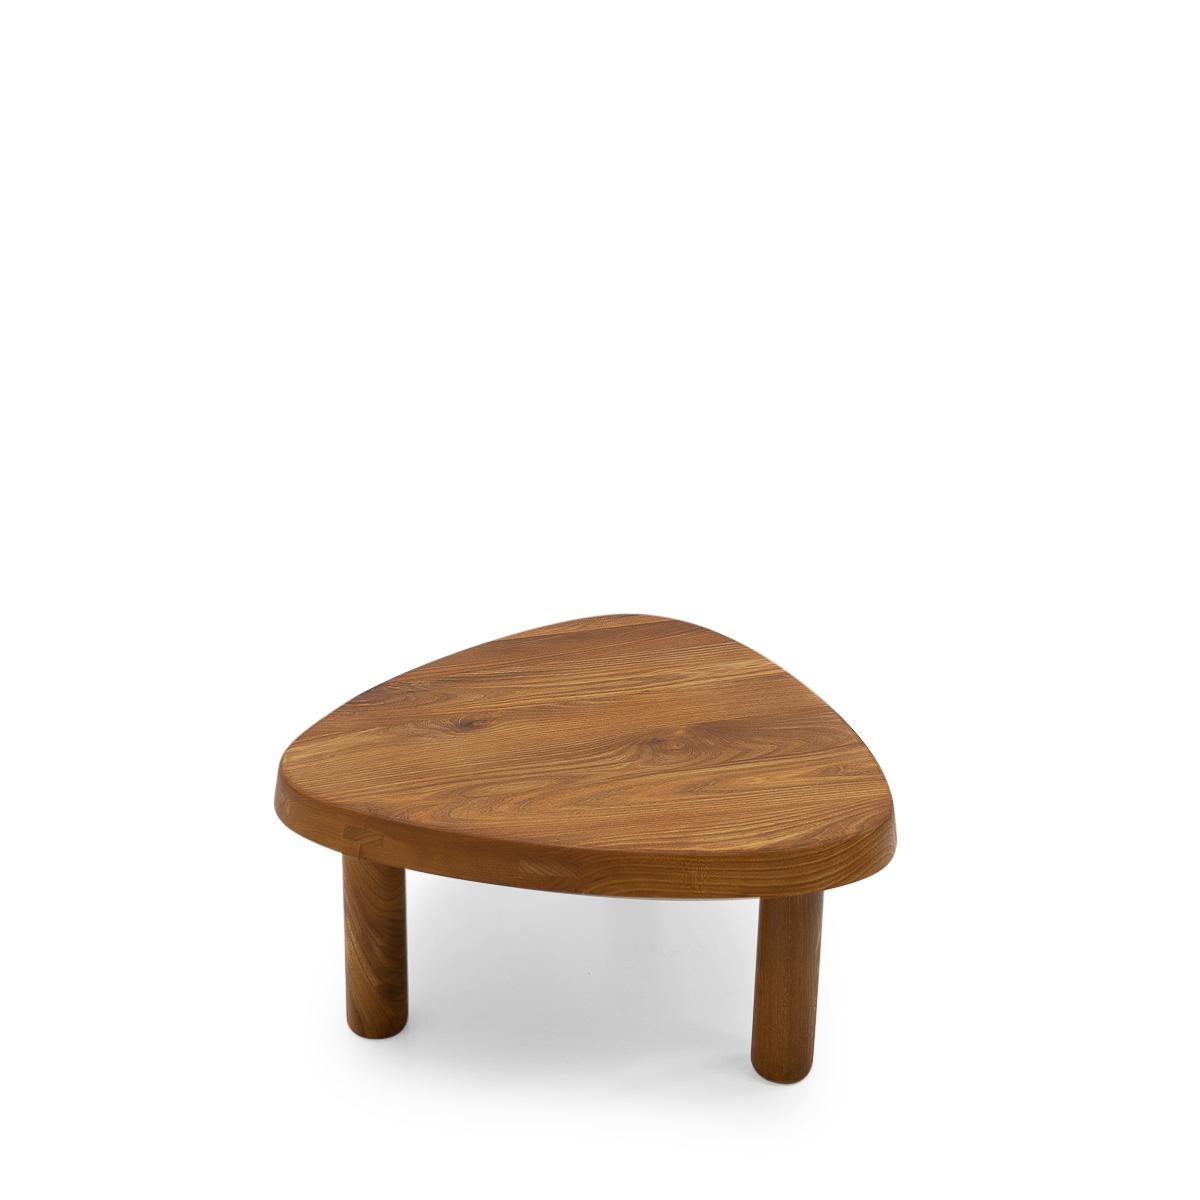 Beautiful original heart-shaped T23 coffee table designed by Pierre Chapo.

As with all furniture by Chapo, this piece shows excellent craftsmanship, is constructed in solid wood and was made to last.

French elmwood is due to the Dutch elm disease